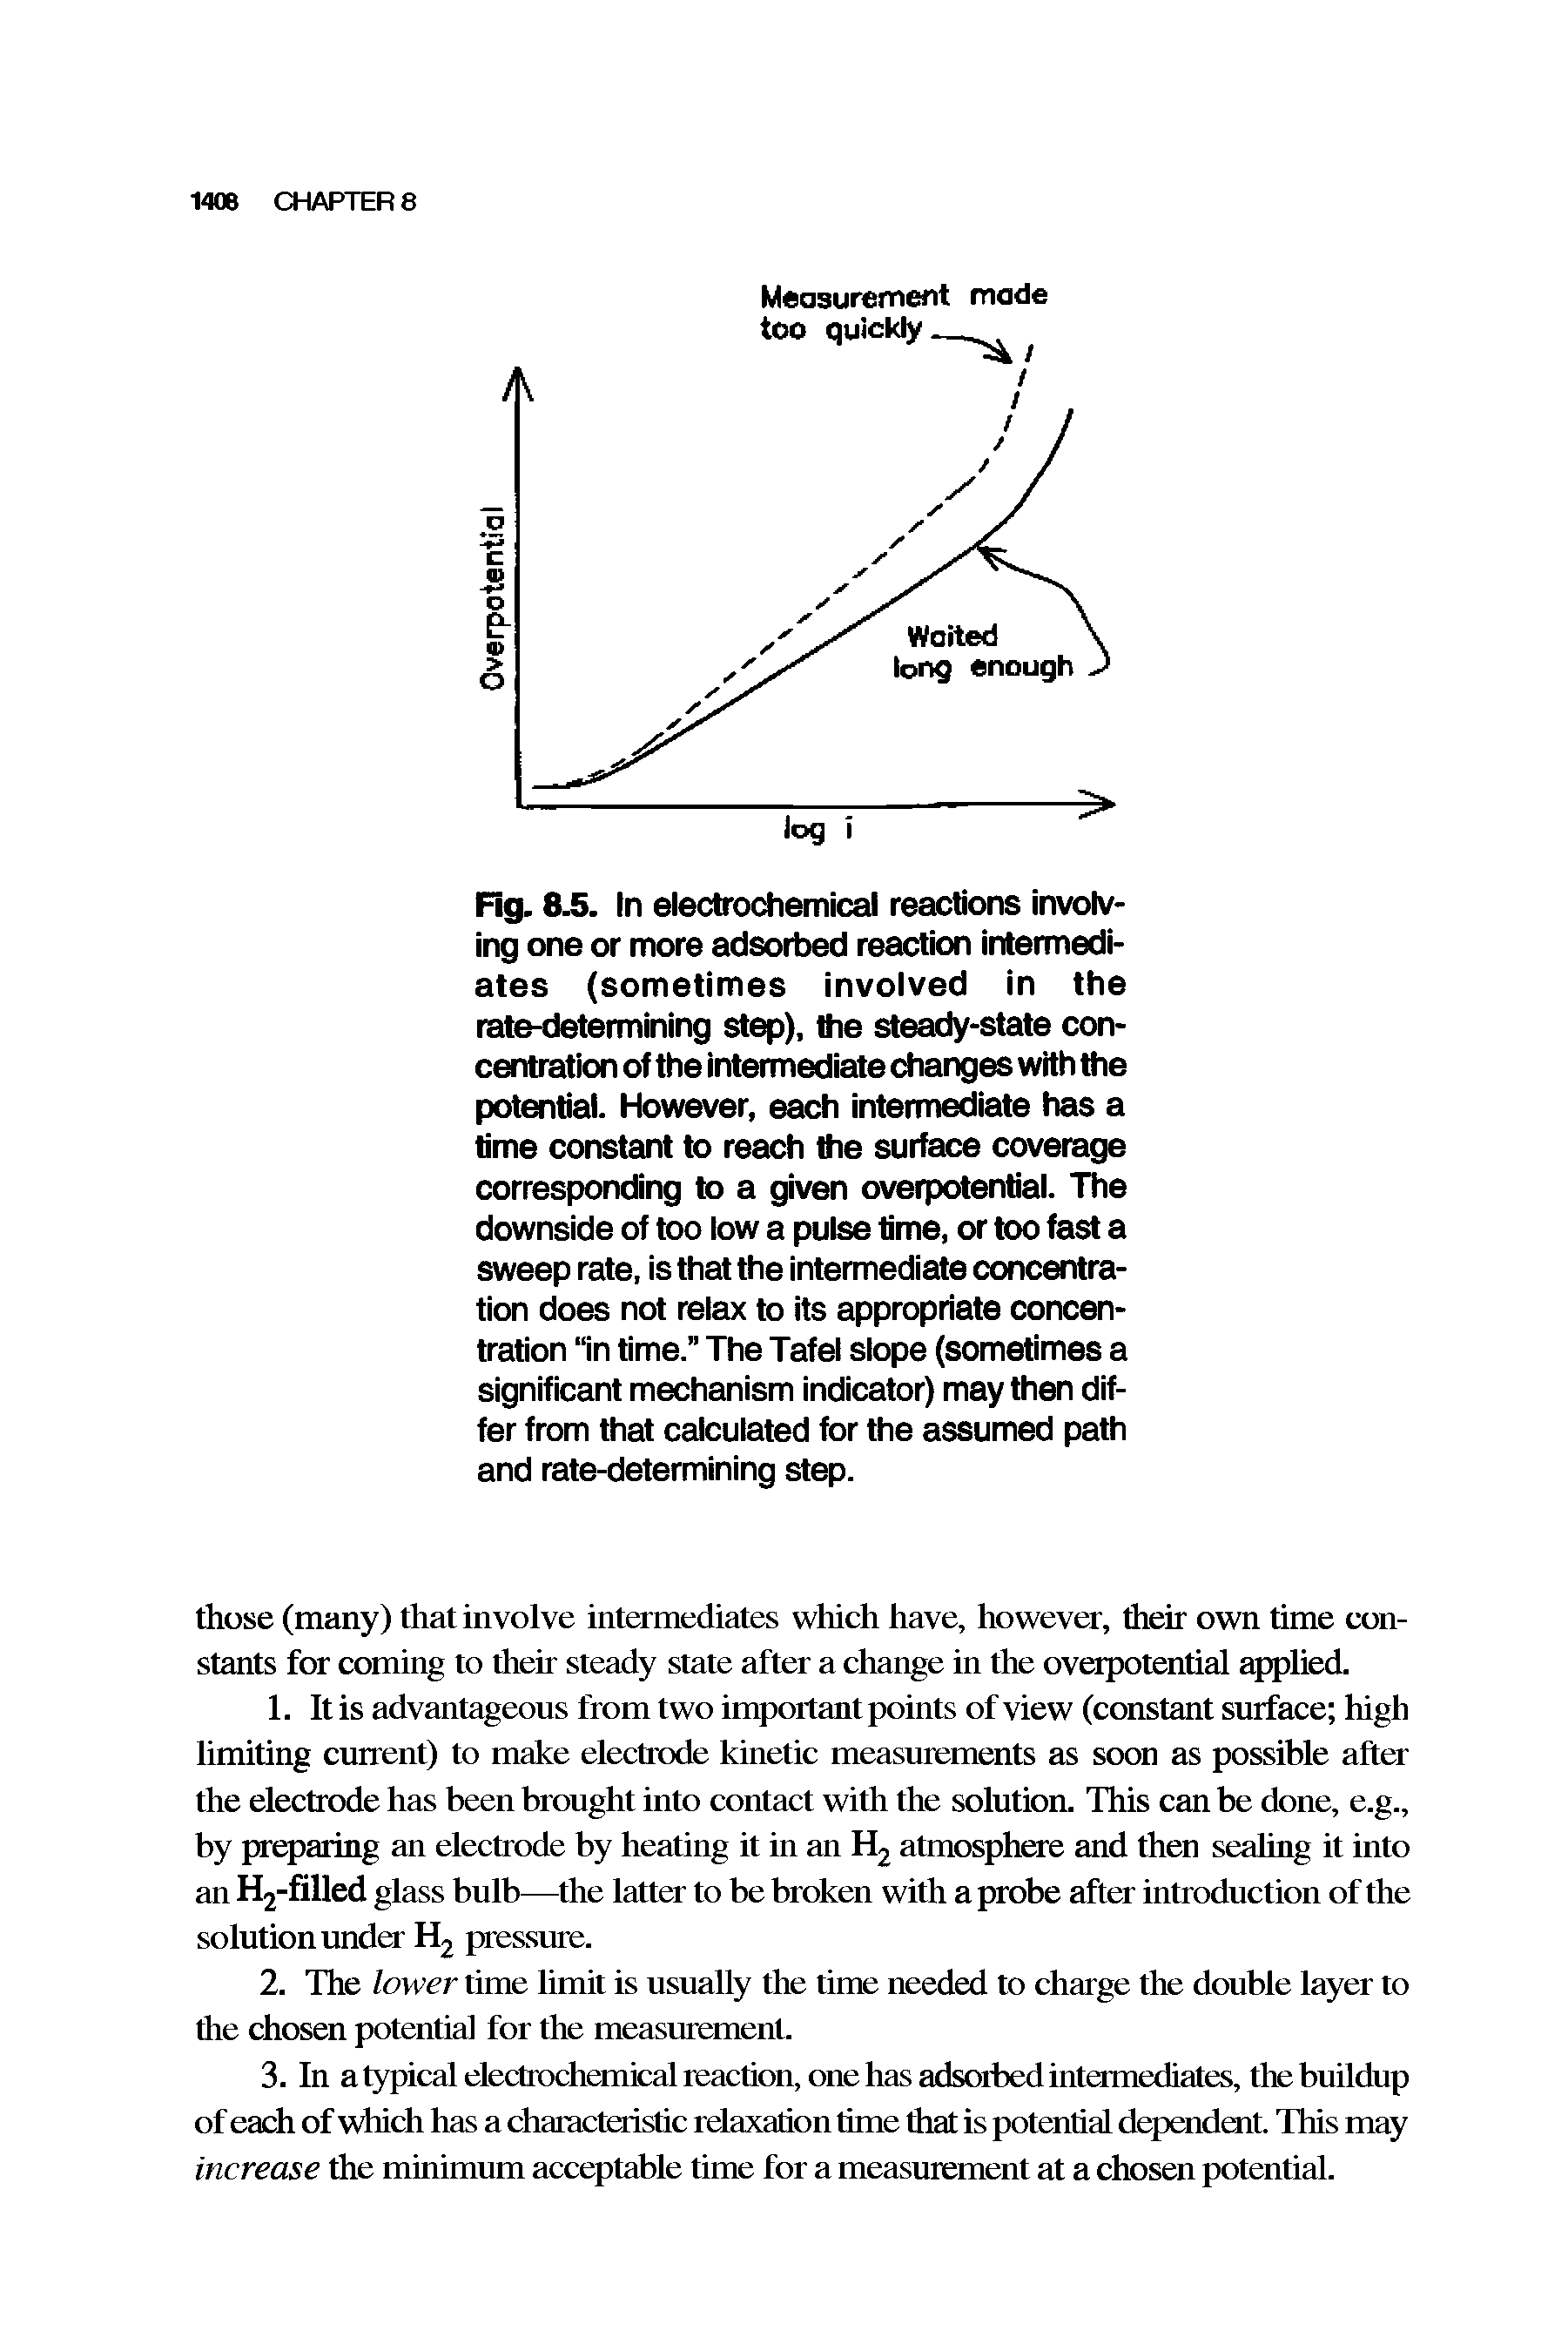 Fig. 8.5. In electrochemical reactions involving one or more adsorbed reaction intermediates (sometimes involved in the rate-determining step), the steady-state concentration of the intermediate changes with the potential. However, each intermediate has a time constant to reach the surface coverage corresponding to a given overpotential. The downside of too low a pulse time, or too fast a sweep rate, is that the intermediate concentration does not relax to its appropriate concentration in time. The Tafel slope (sometimes a significant mechanism indicator) may then differ from that calculated for the assumed path and rate-determining step.